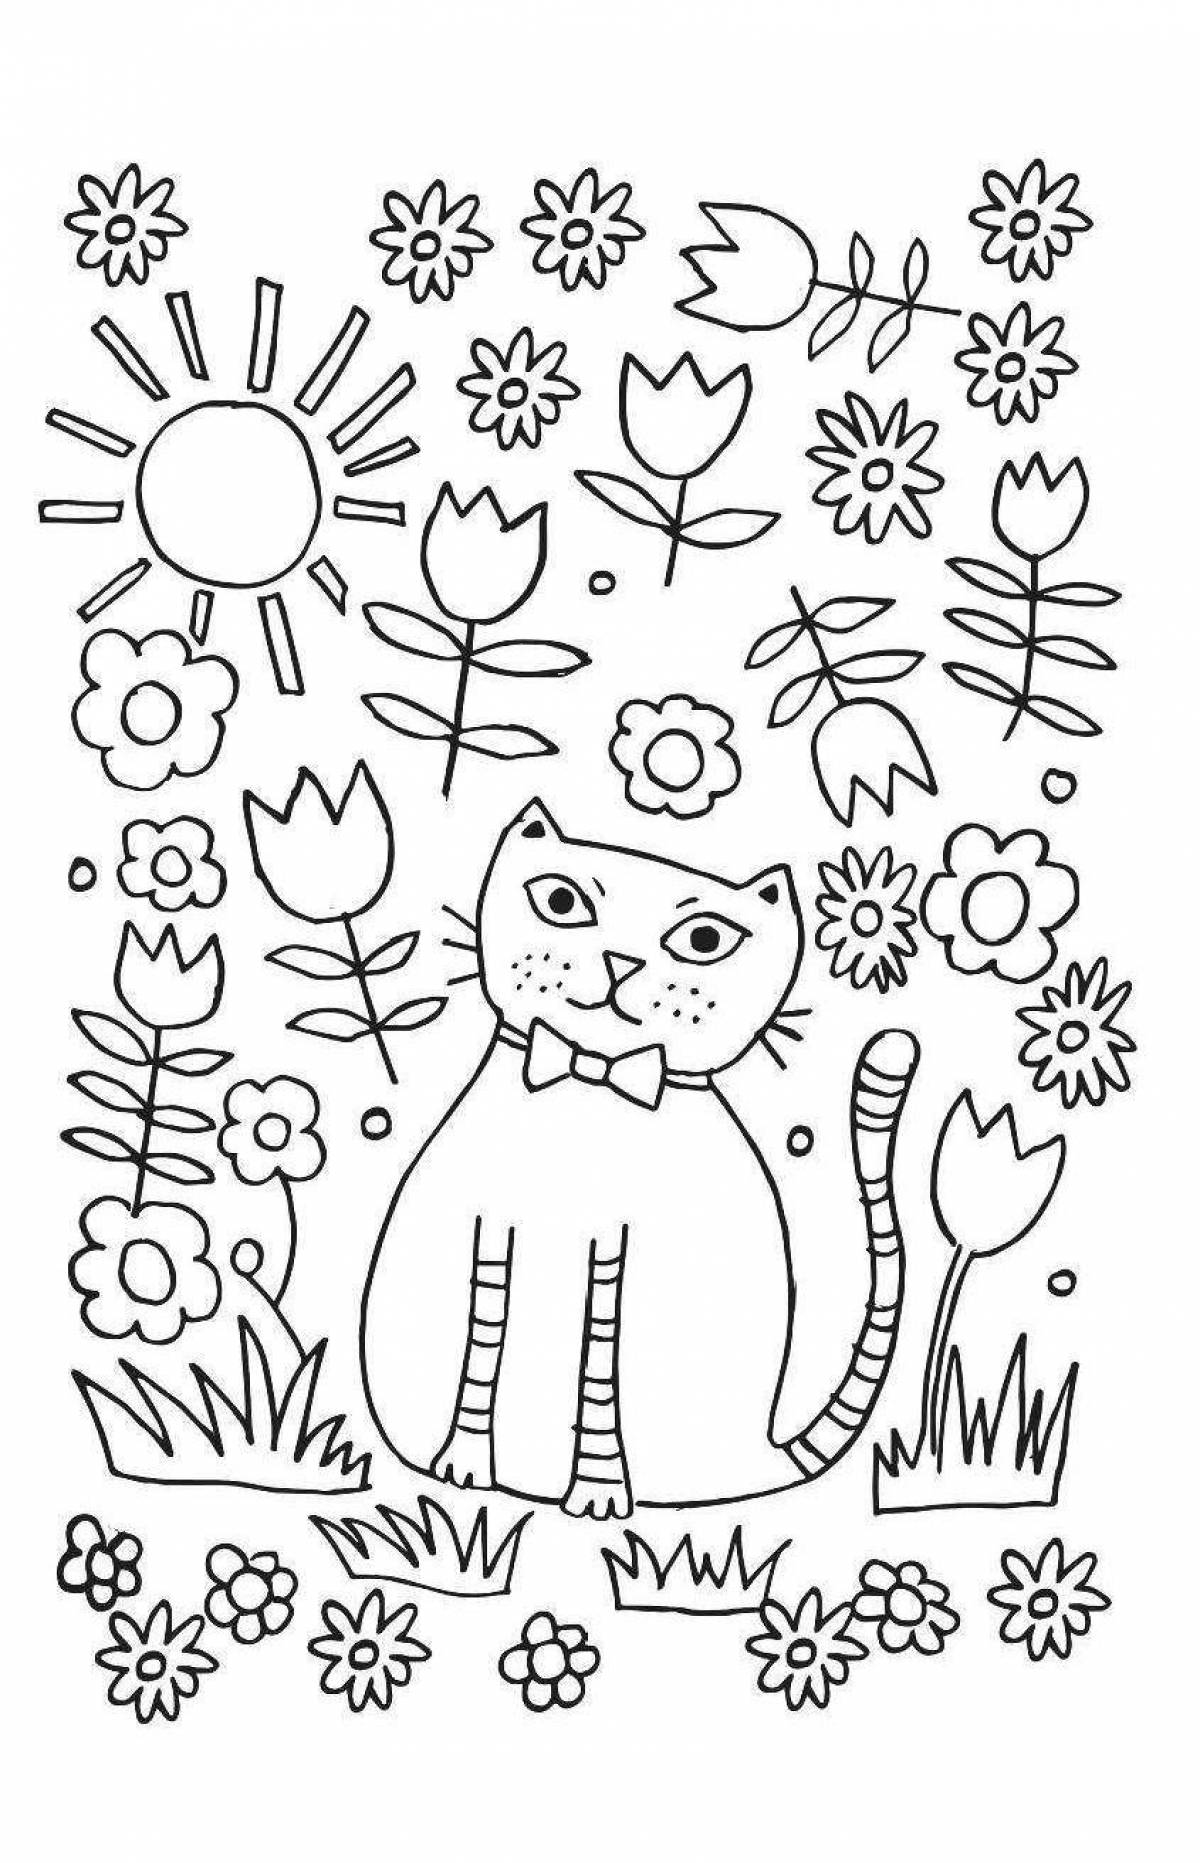 Great anti-stress cat therapy coloring book